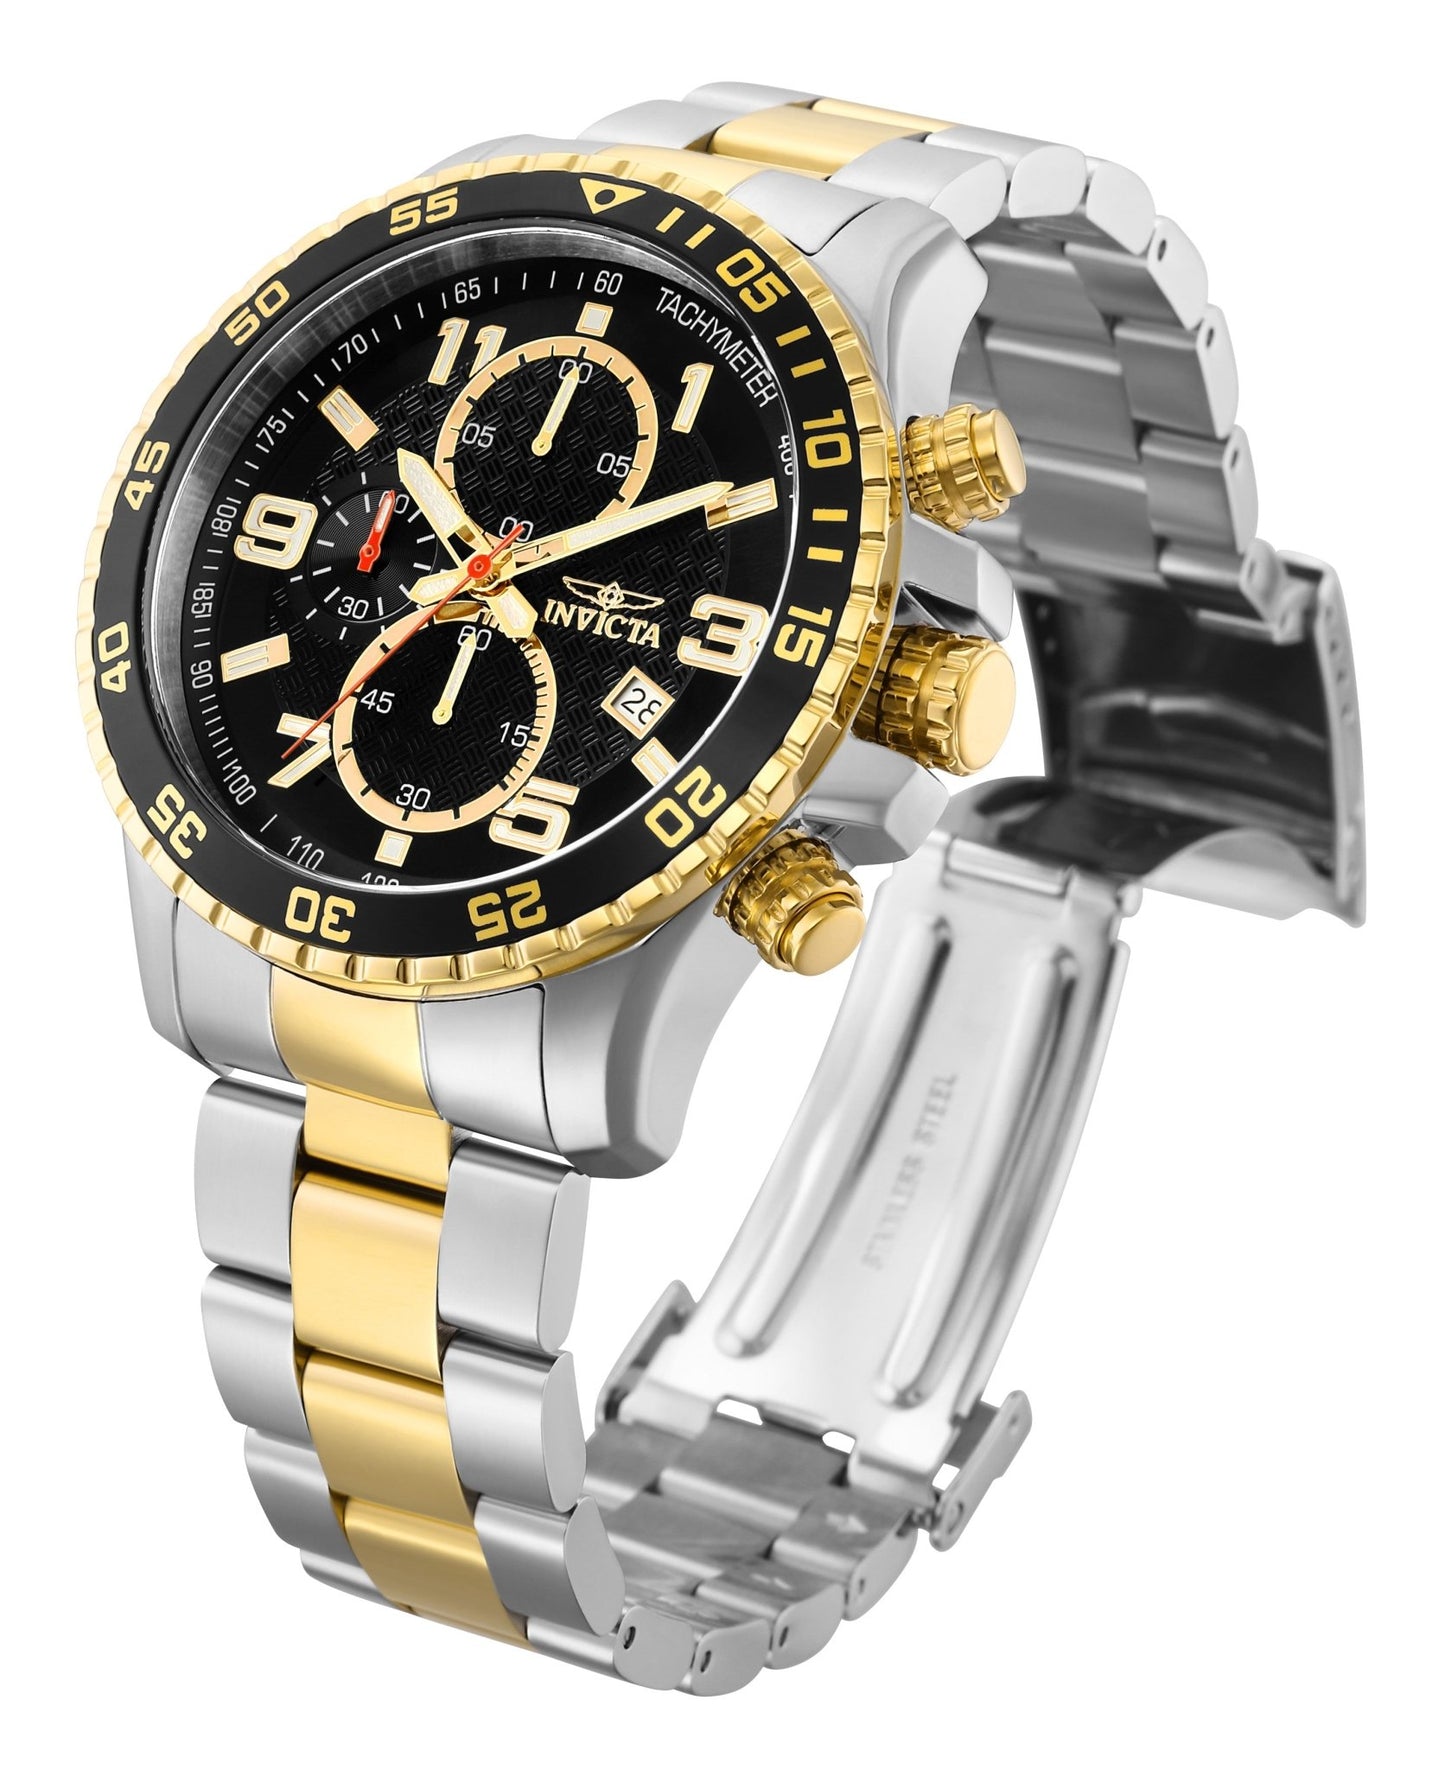 Invicta Specialty 14876 Men's Two-Tone Stainless Steel and Gold Quartz Watch side angle view